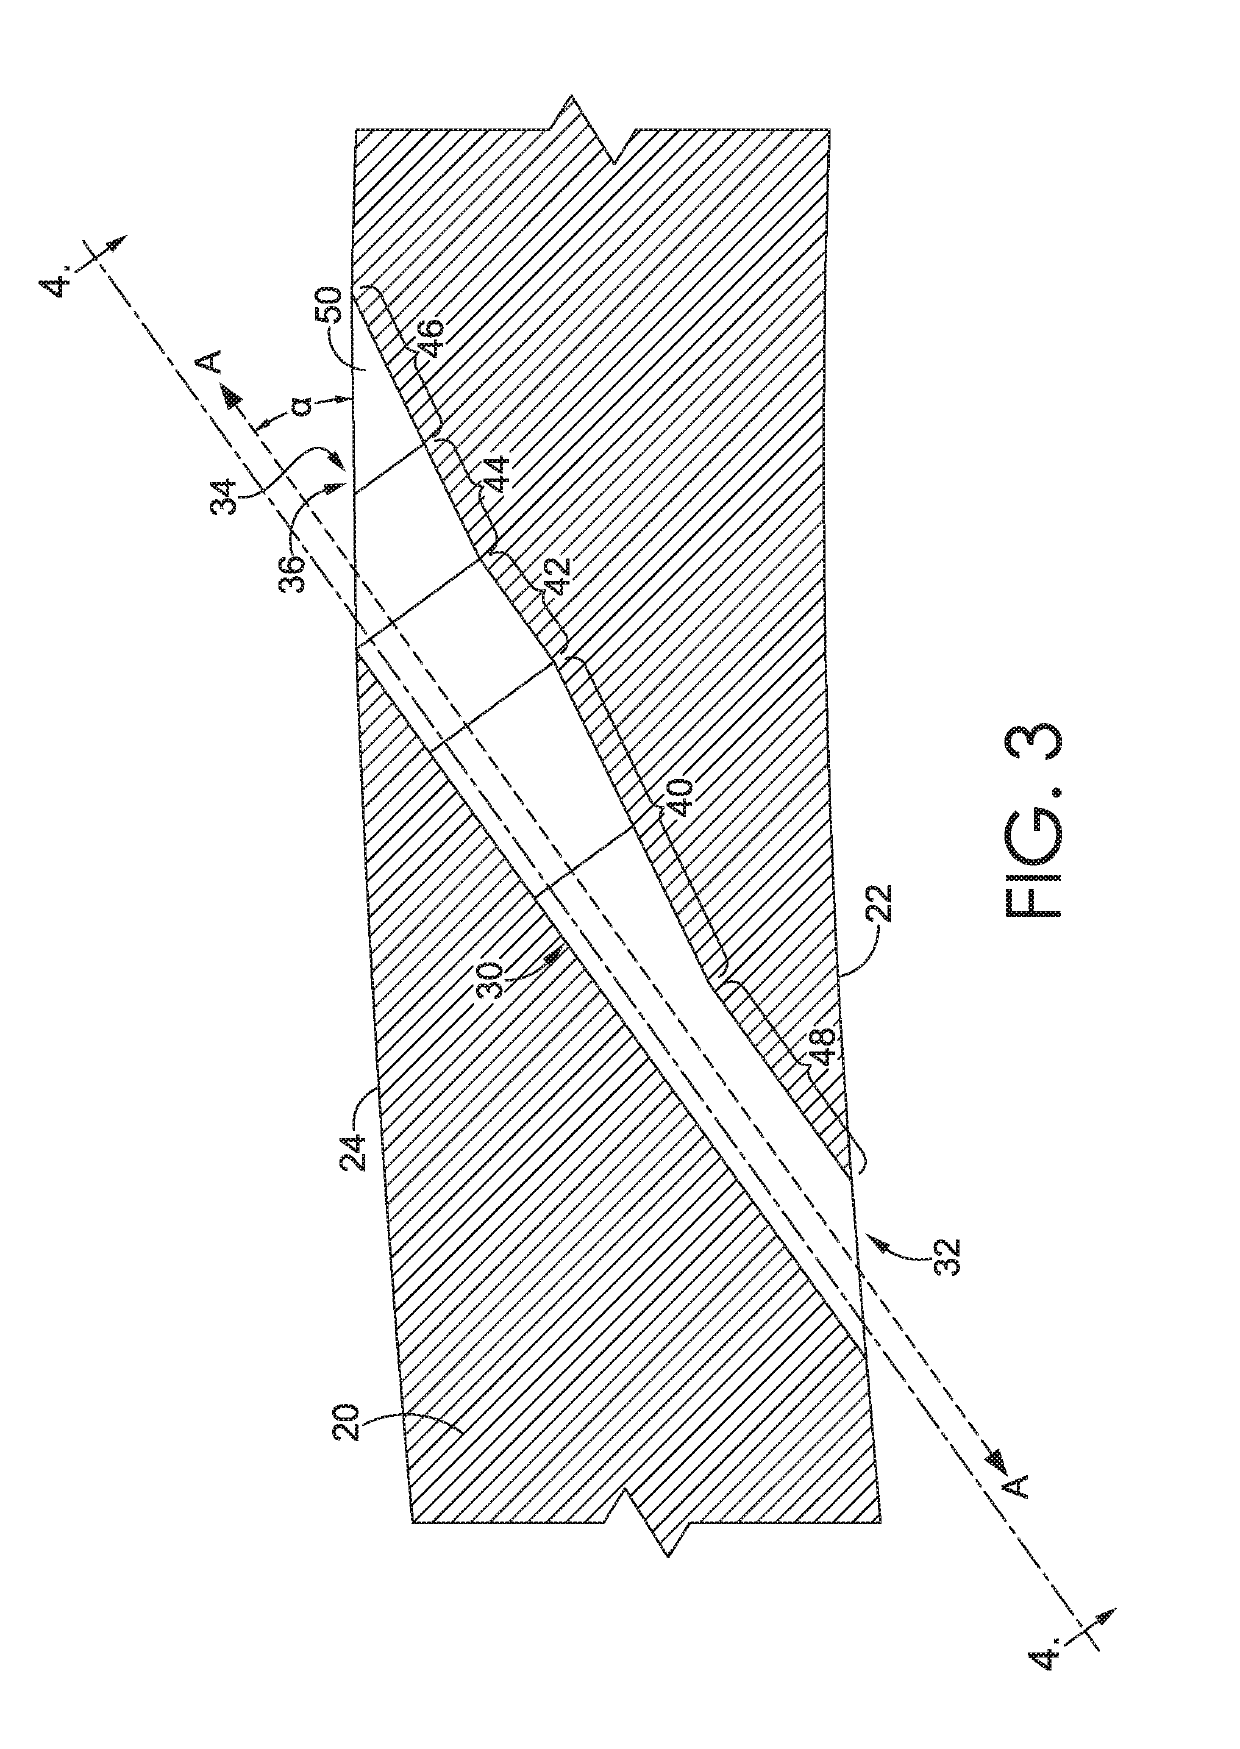 Airfoil cooling passageways for generating improved protective film